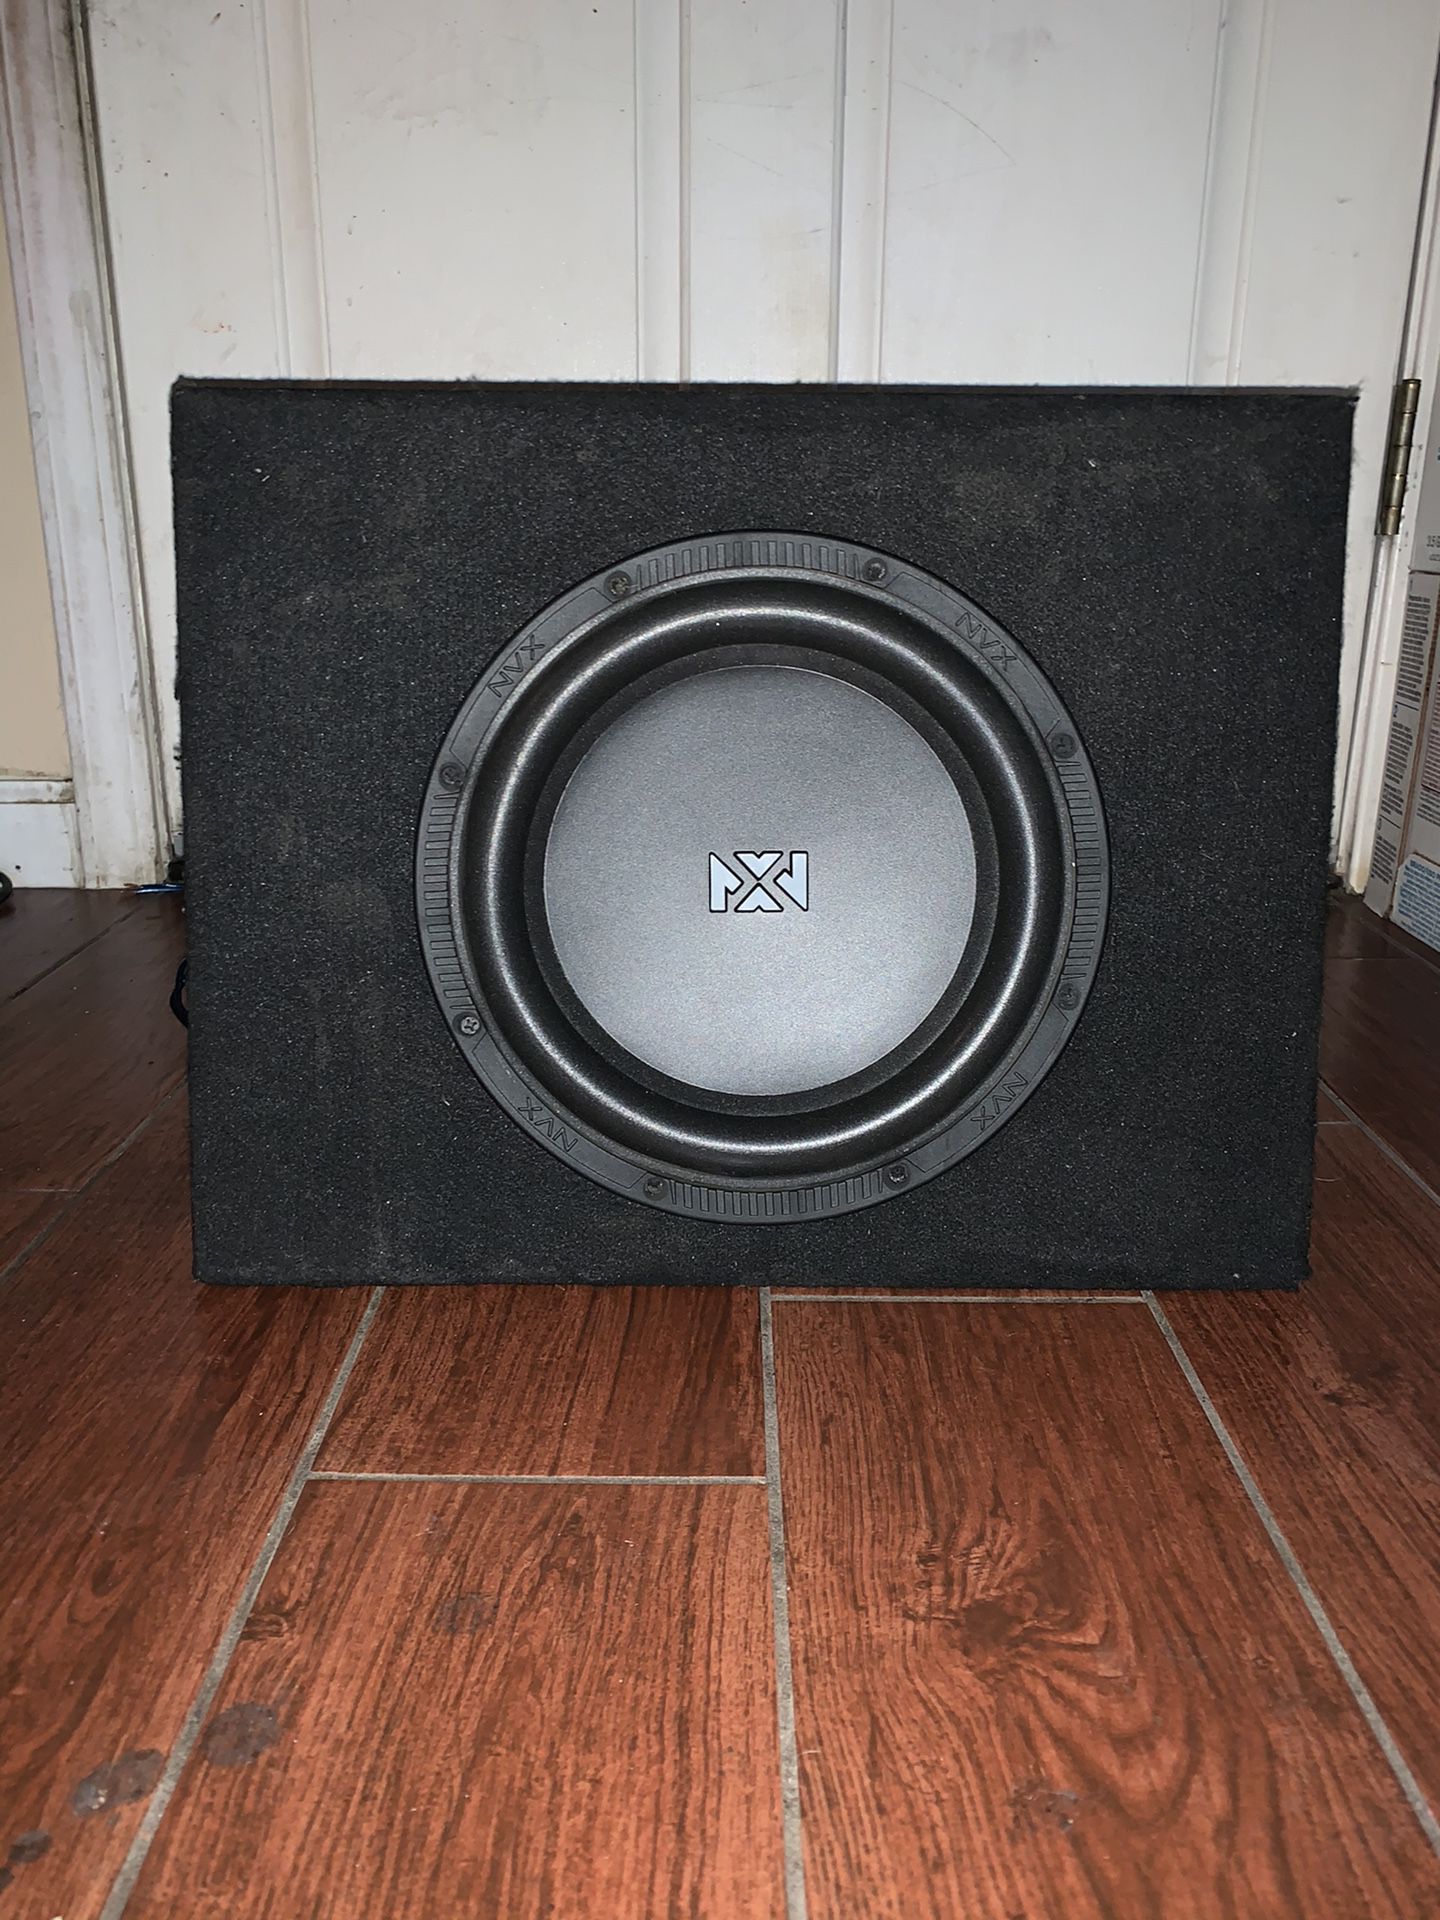 10” subwoofer in box Must Go!